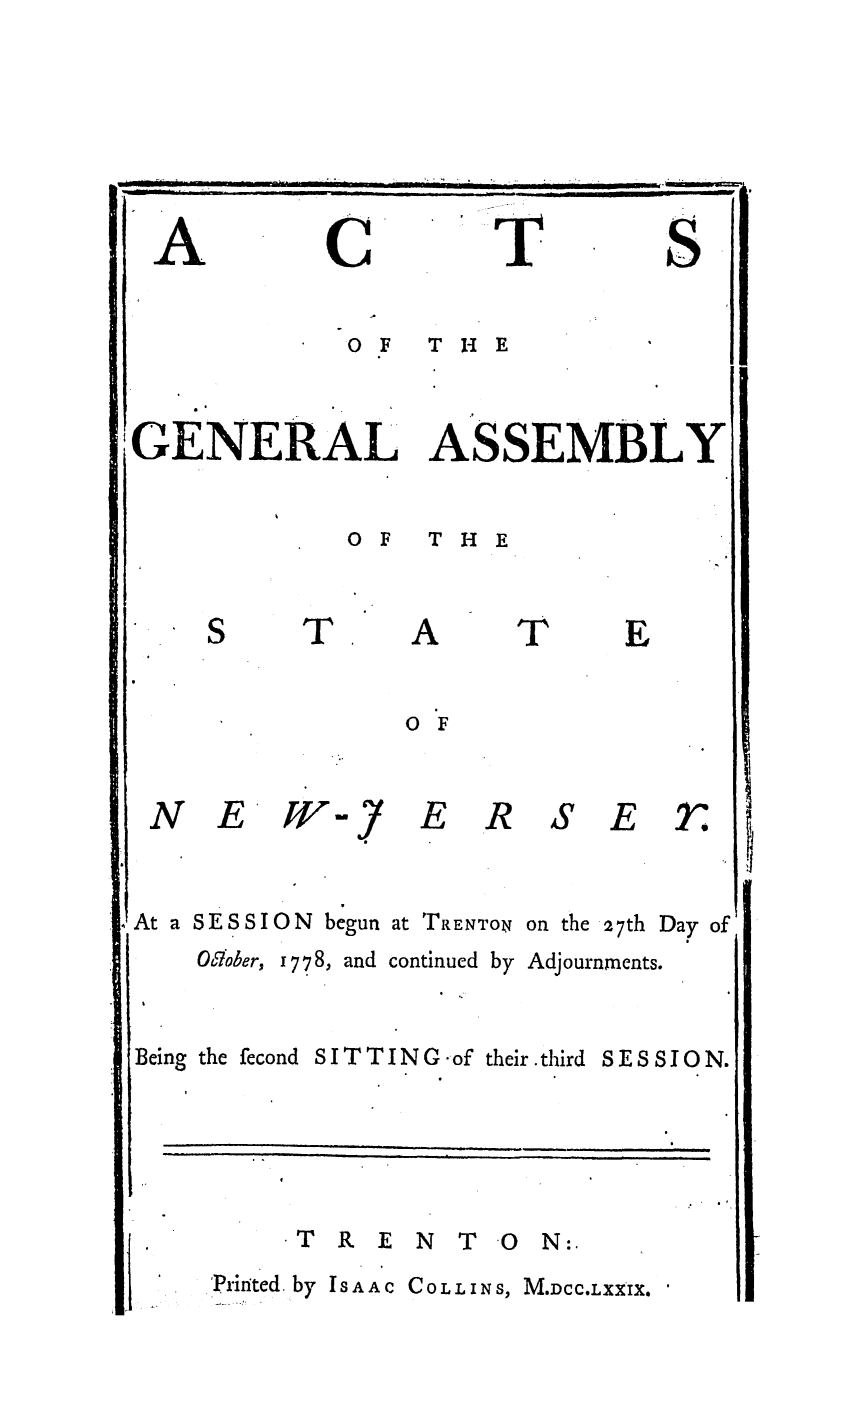 handle is hein.ssl/ssnj0225 and id is 1 raw text is: A

C

S

OF  THE

GENERAL ASSEMBLY

OF  THE

T

A

T

O F

N E

w

E

S'E

At a SESSION begun at TRENTON

on the 27th Day of

OSober, 1778, and continued by Adjournments.

Being the fecond

SITTING of their.third

SESSION.

*T R E N T 0 N:.

'Prirted by ISAAC COLLINS, M.DCC.LXXIX.

i                             I                                                                                           i

 iT


